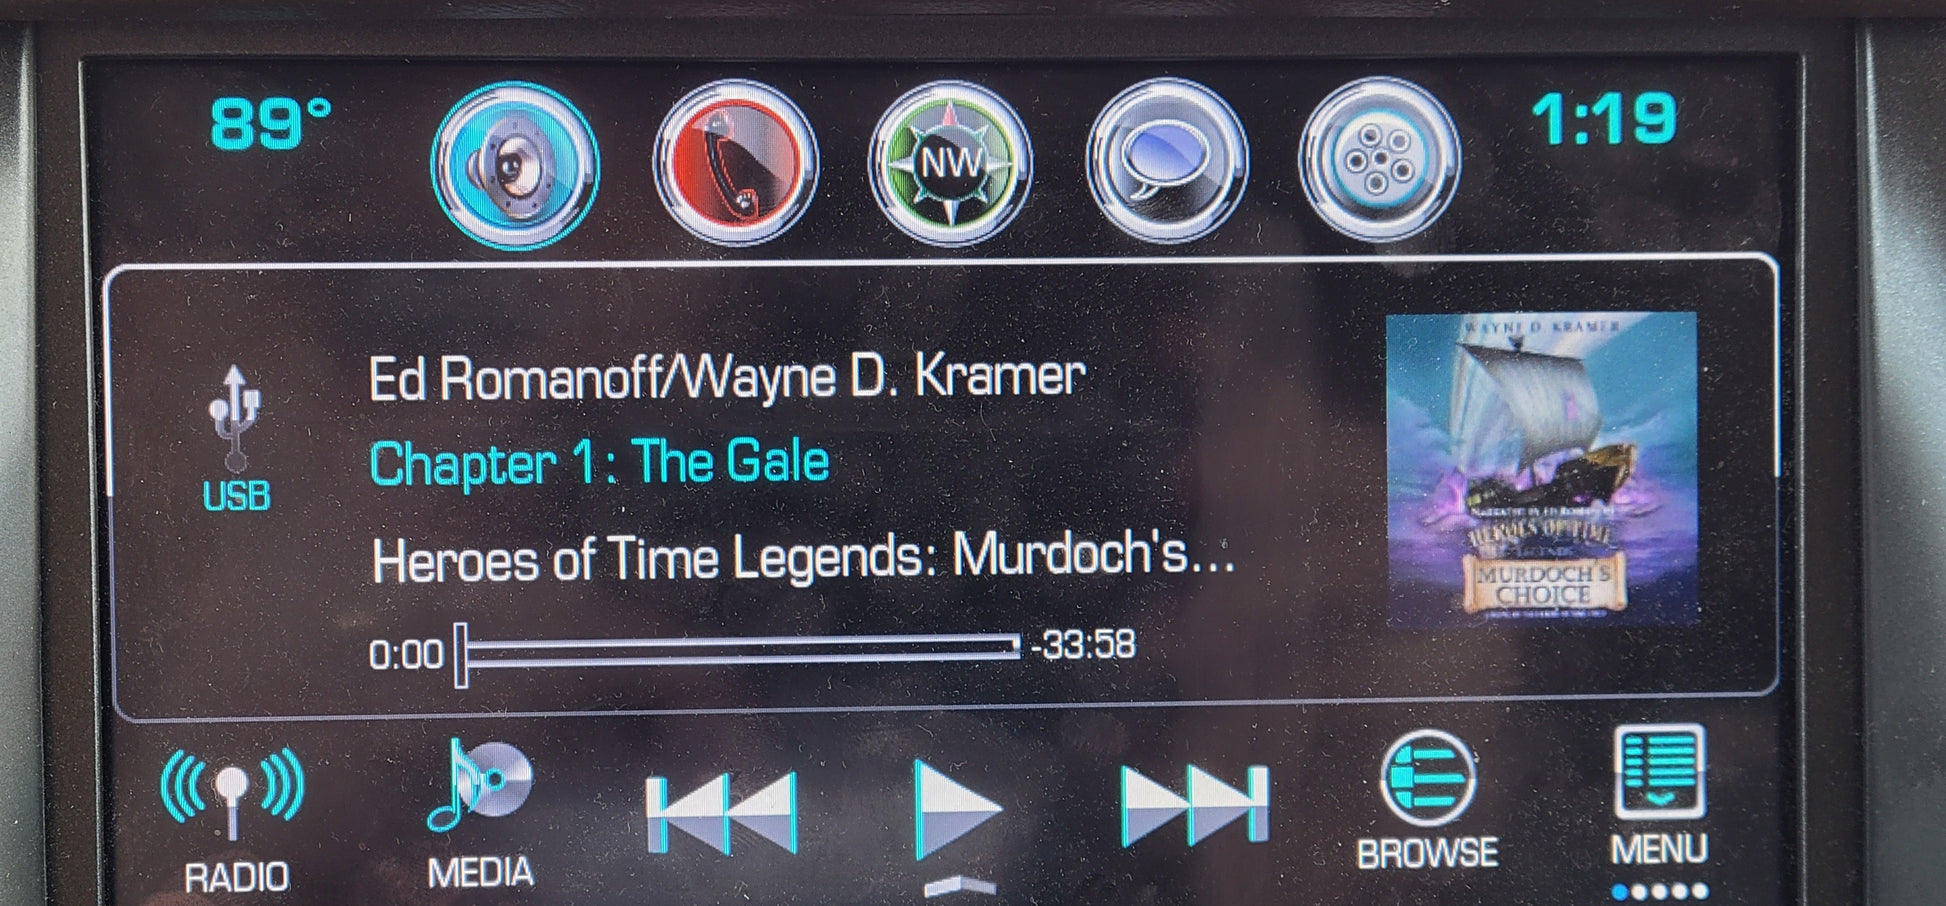 Murdoch's Choice Audiobook MP3 files playing in standard music player